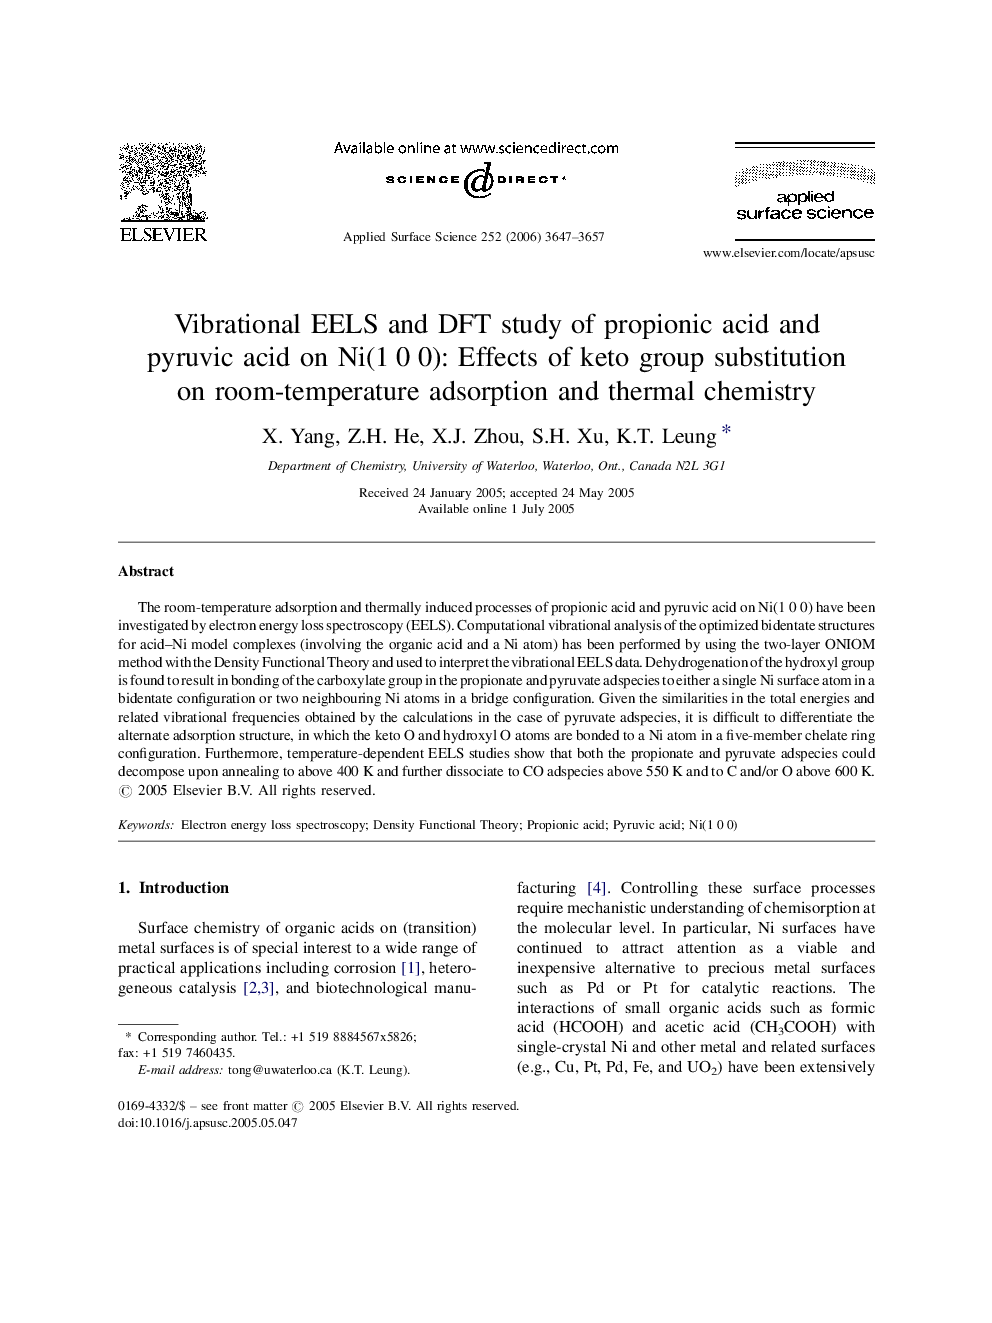 Vibrational EELS and DFT study of propionic acid and pyruvic acid on Ni(1 0 0): Effects of keto group substitution on room-temperature adsorption and thermal chemistry